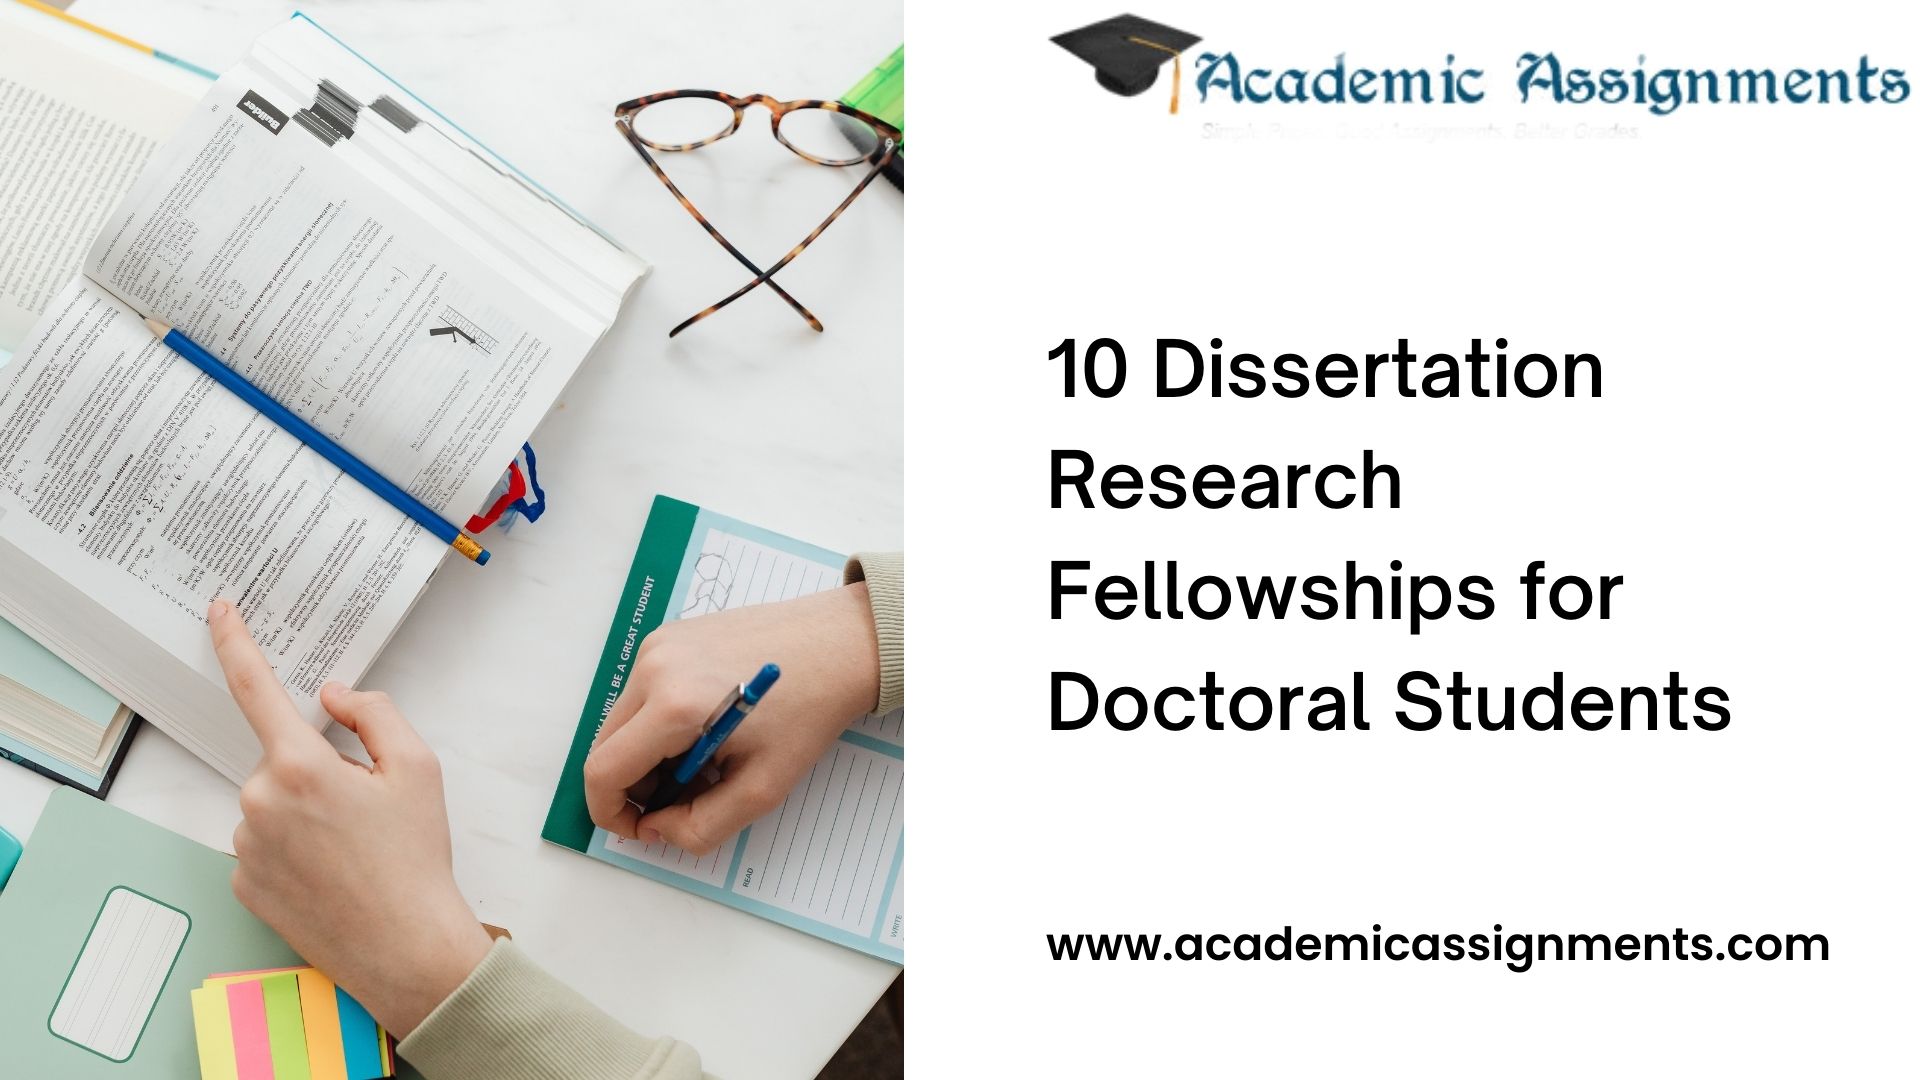 10 Dissertation Research Fellowships for Doctoral Students